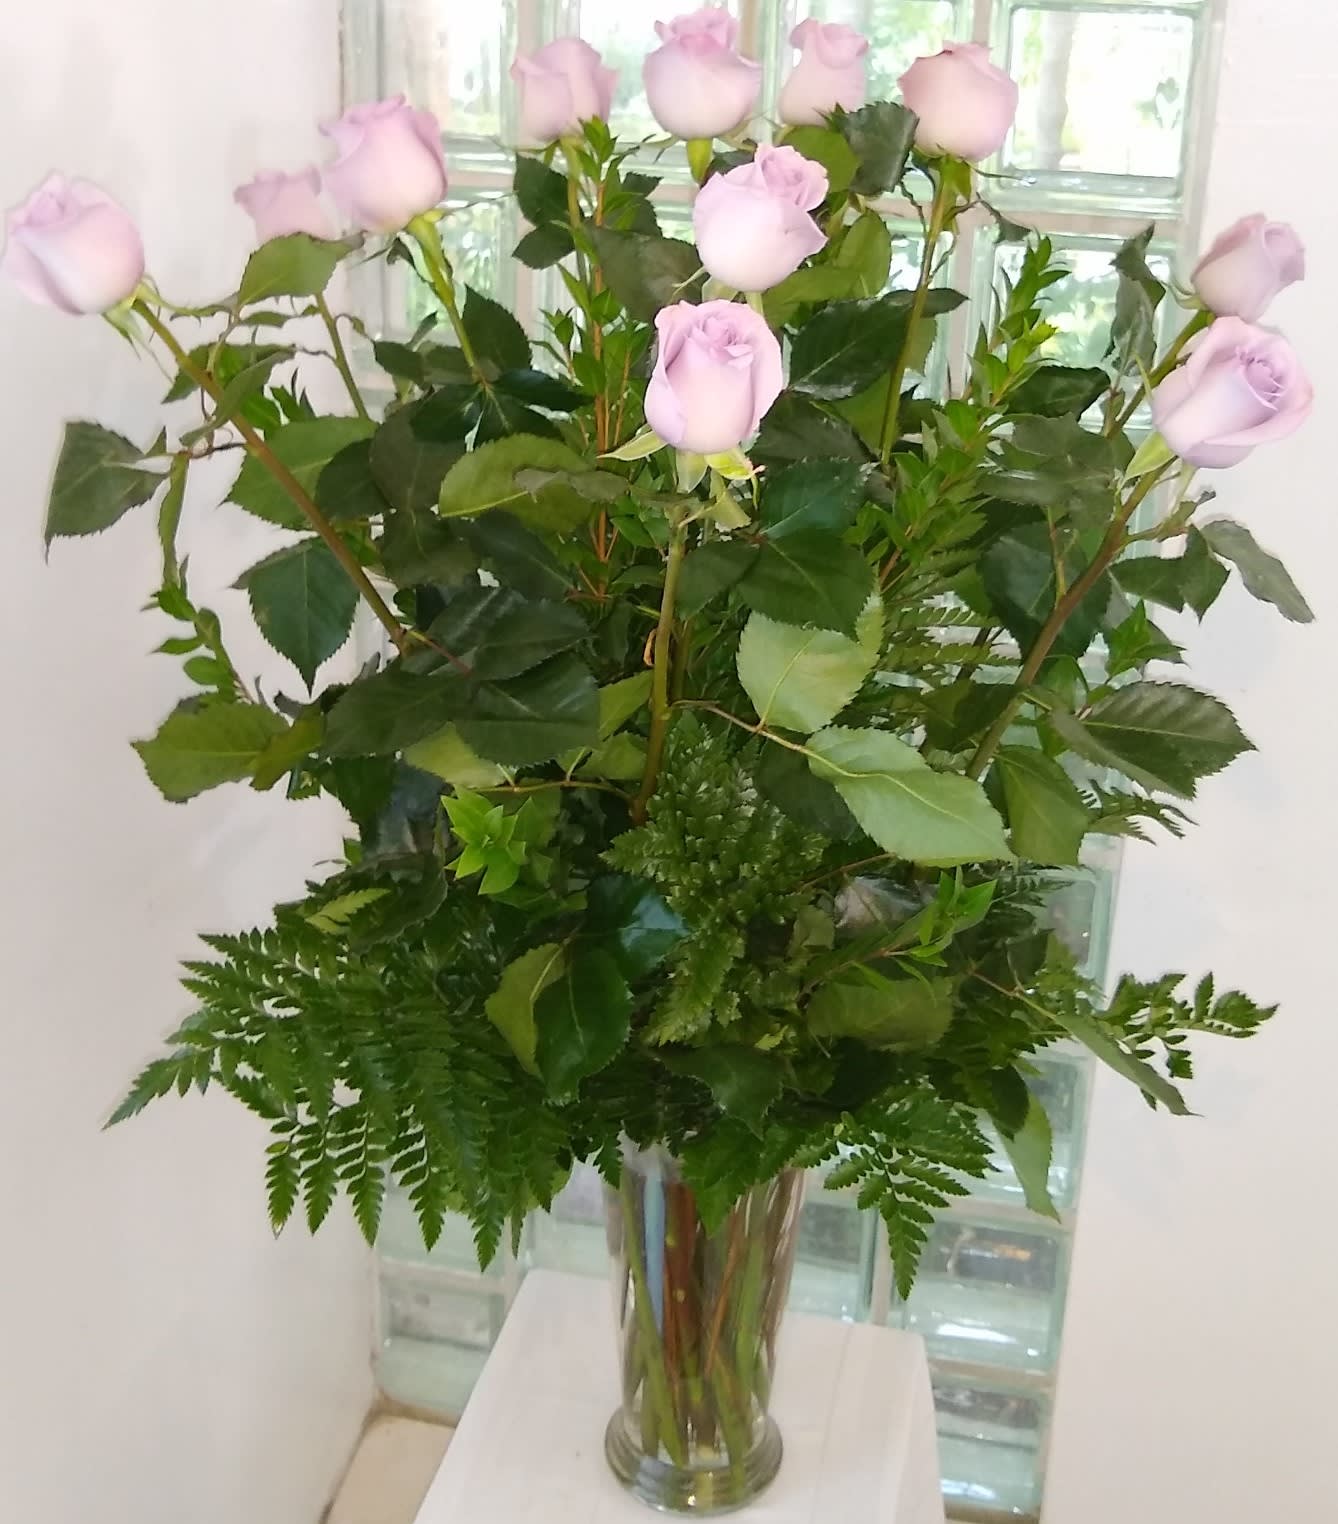 Lavender Roses arranged in a vase - Enchanting and passionate!